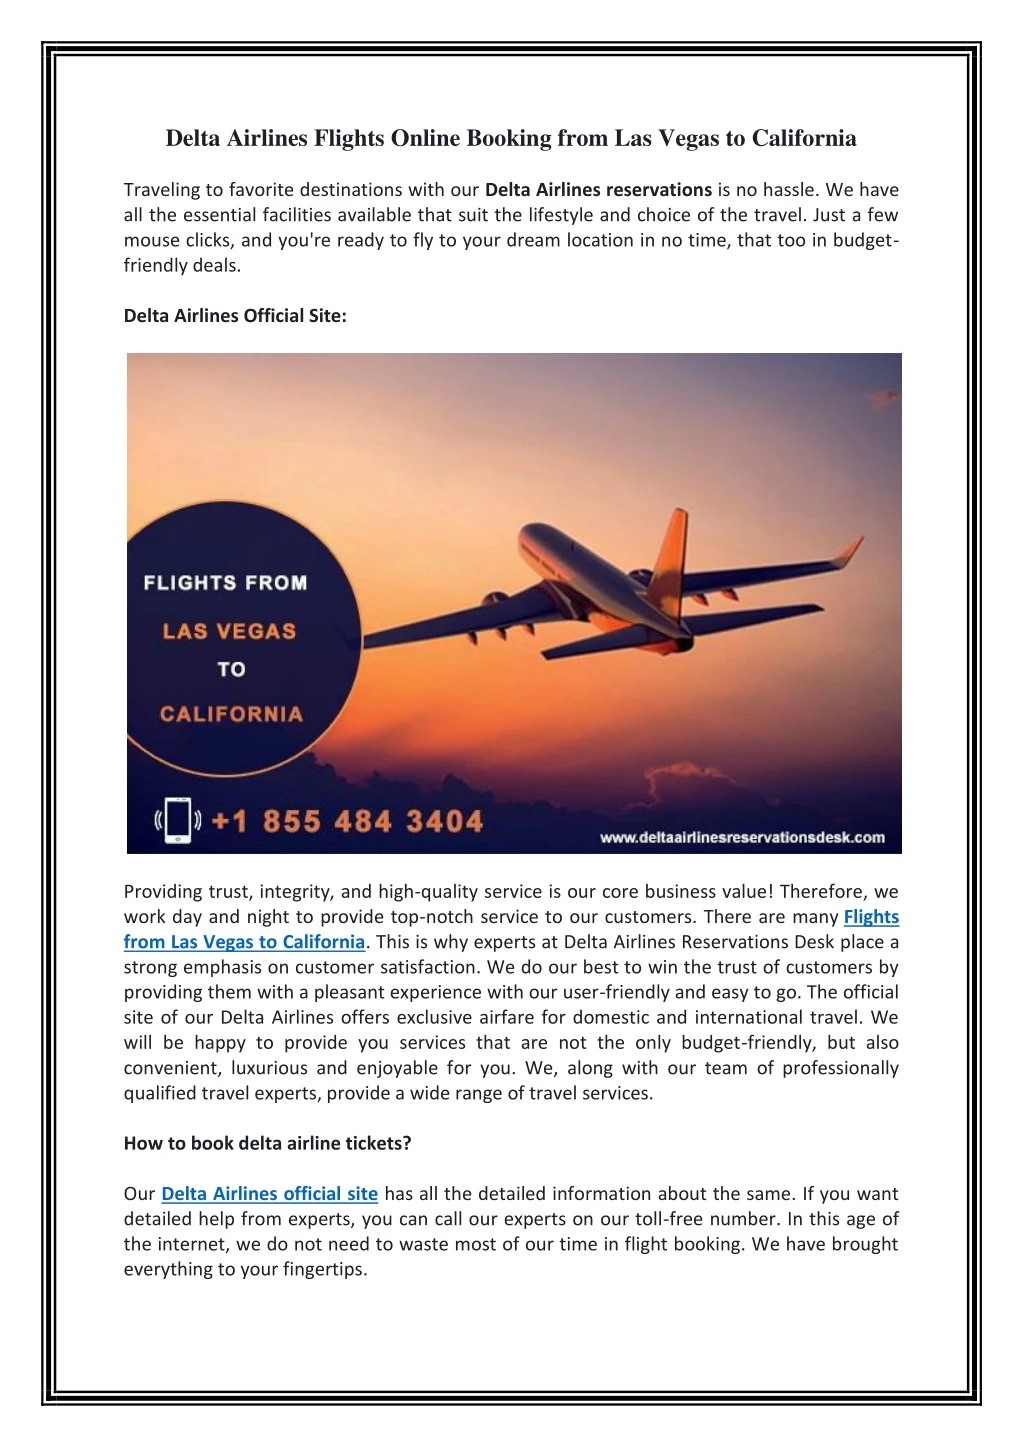 delta airlines flights online booking from